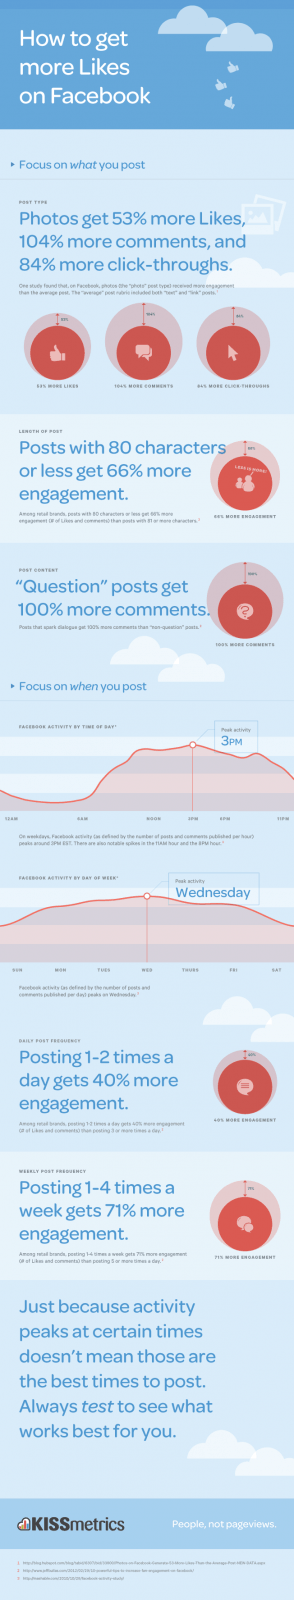 How To Get More Likes On Facebook [Infographic]